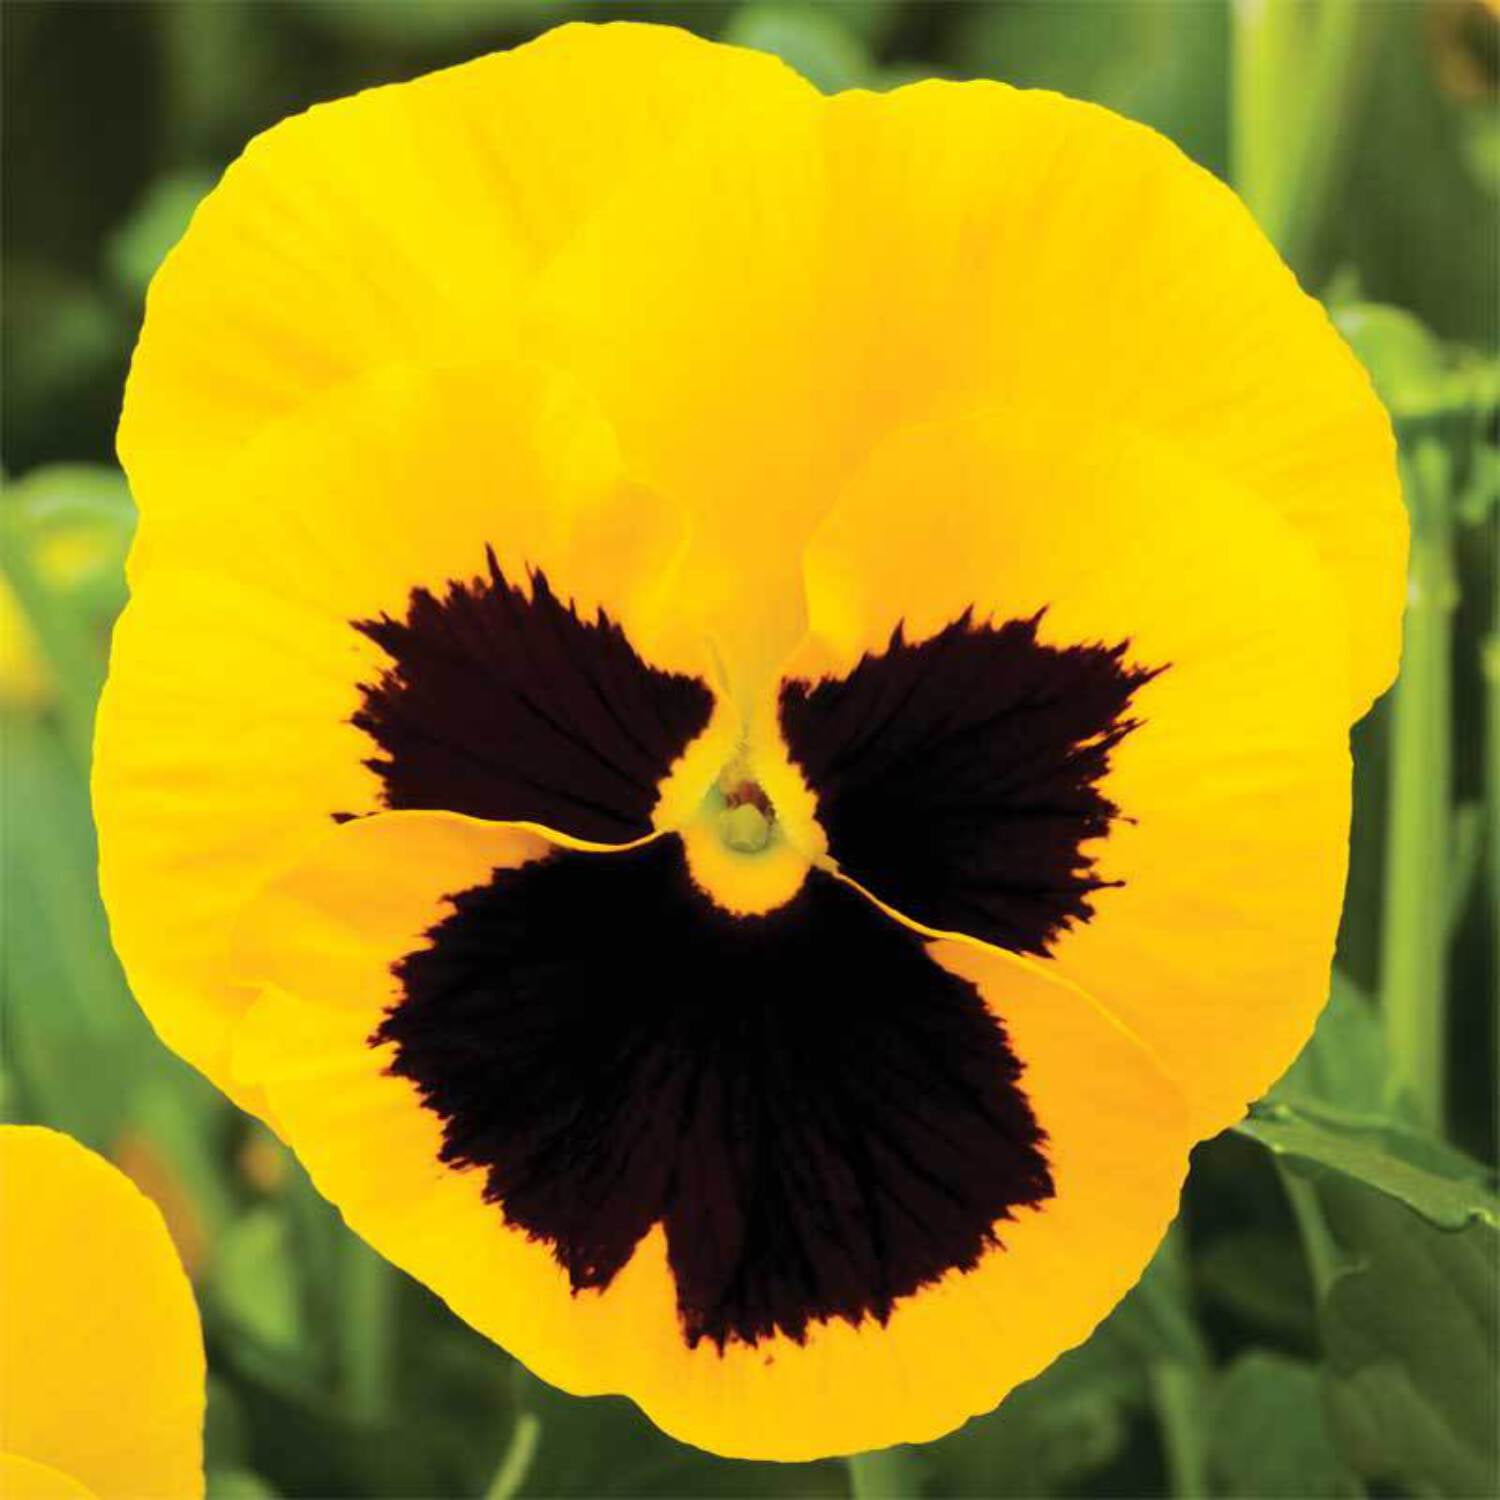 50 Pansy Seeds Delta Premium Rose With Blotch